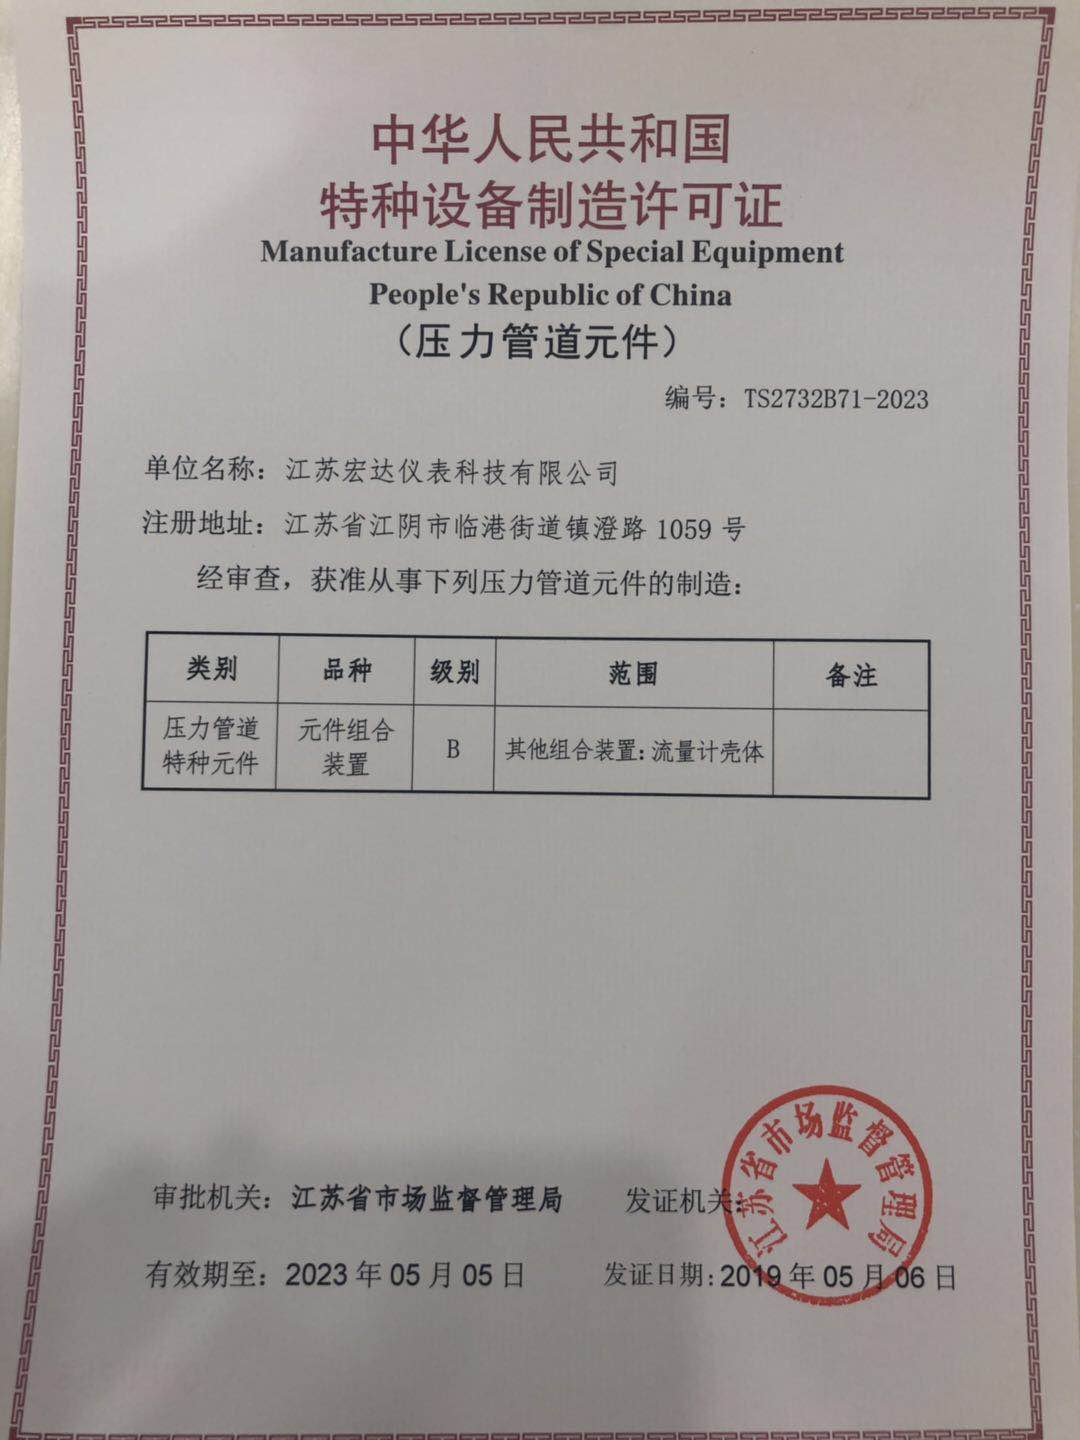 Manufacturing License of Special Equipment